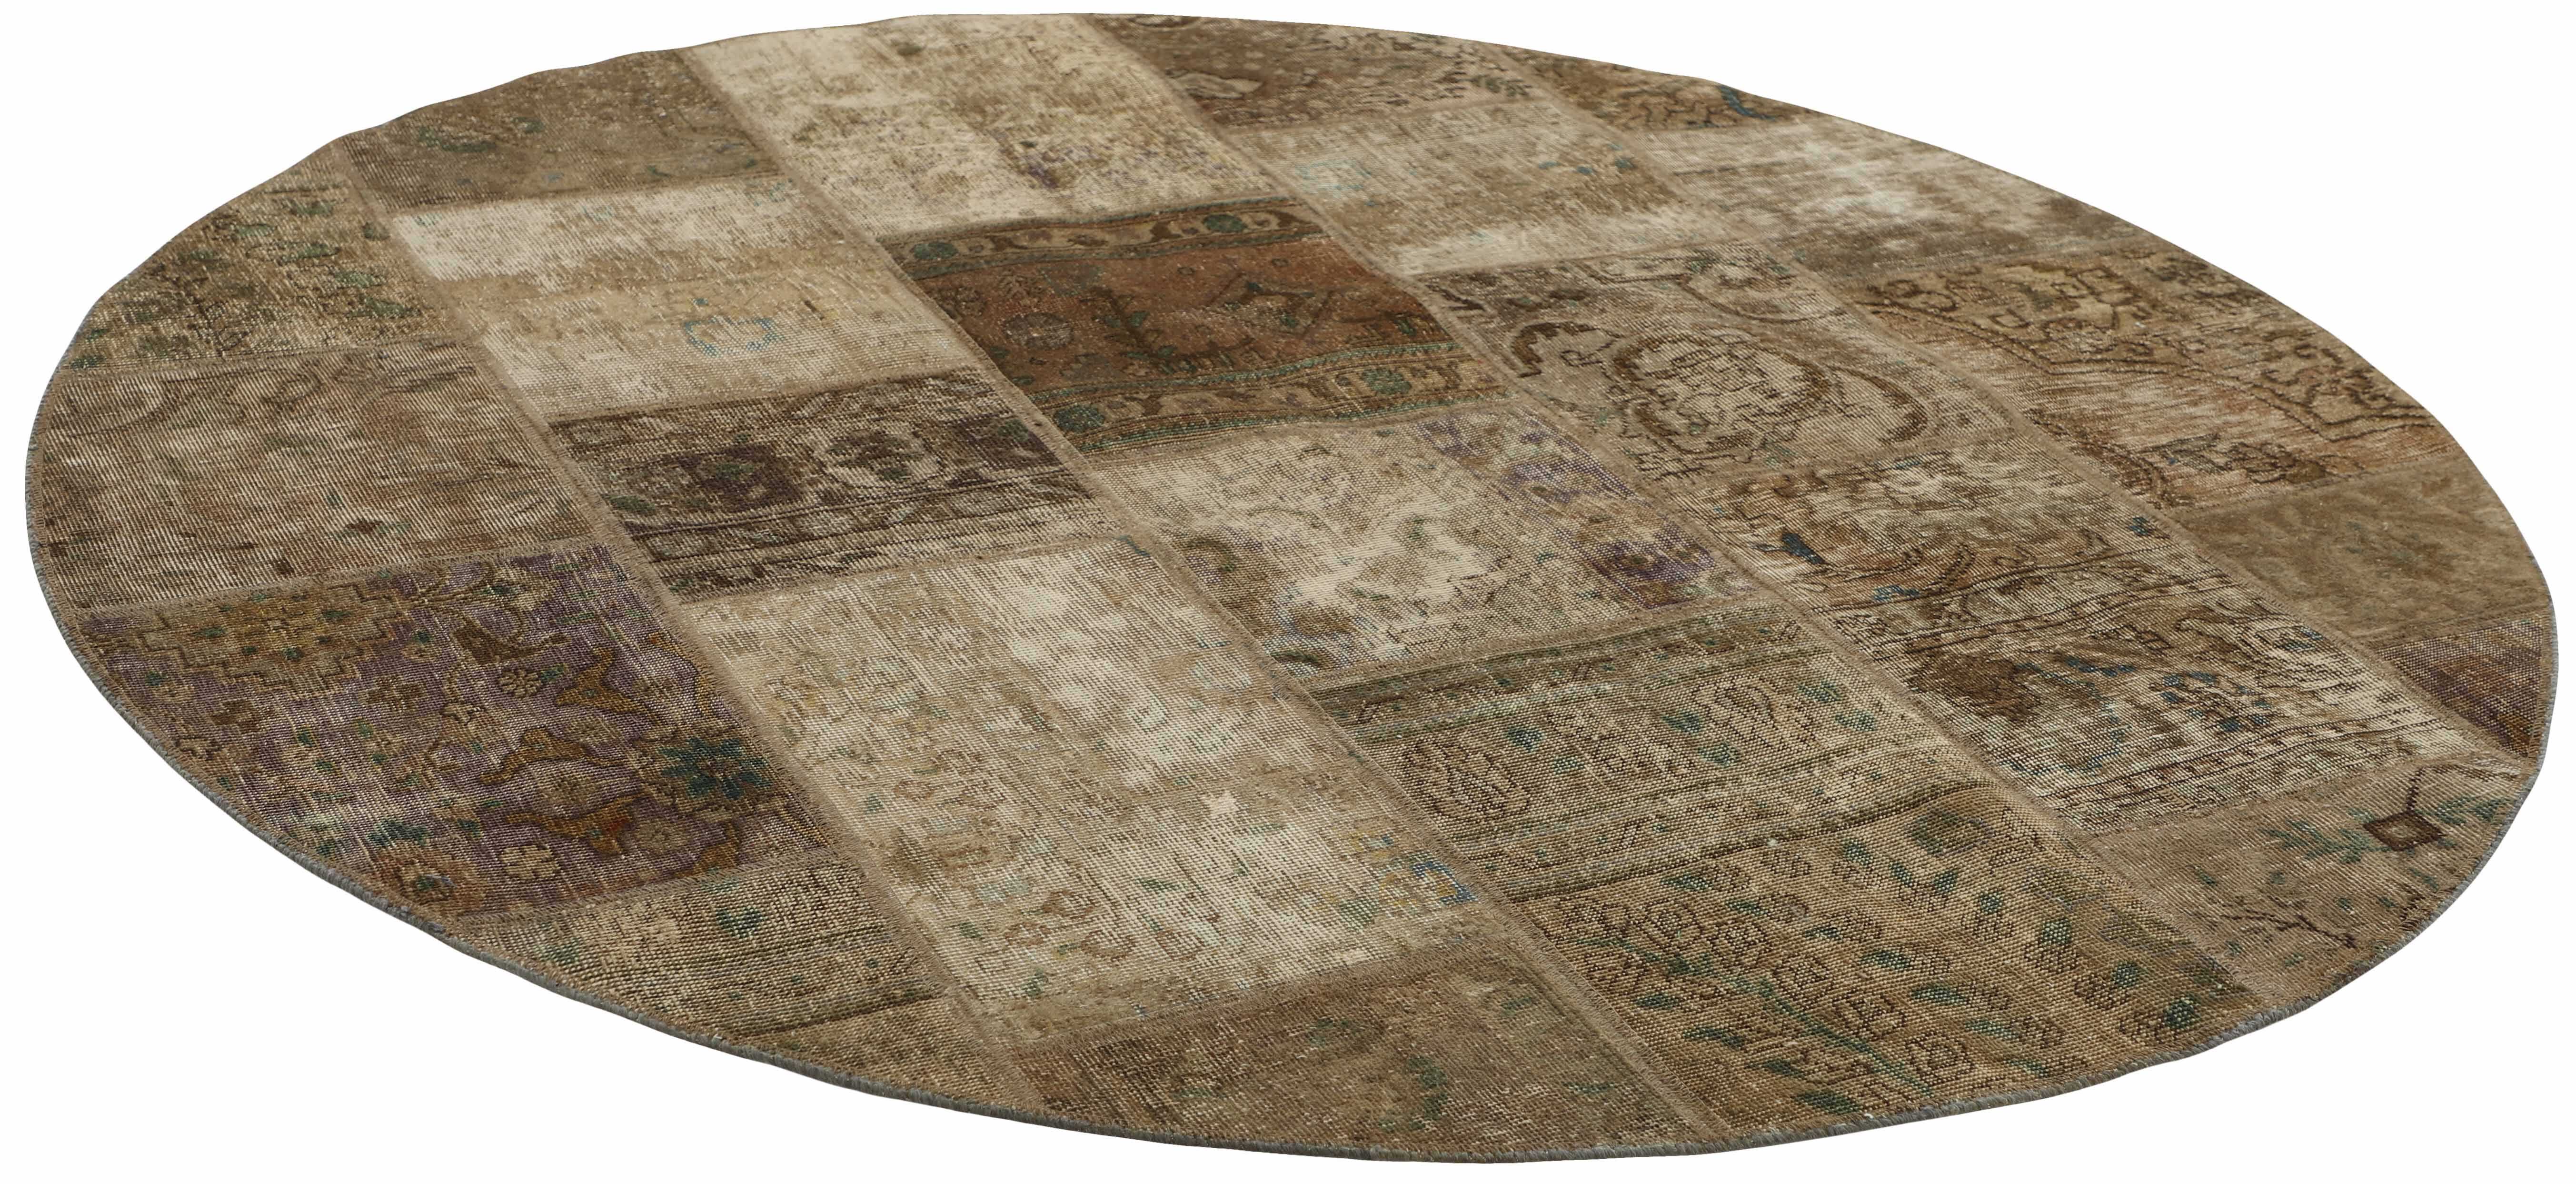 Authentic Beige patchwork persian circle rug